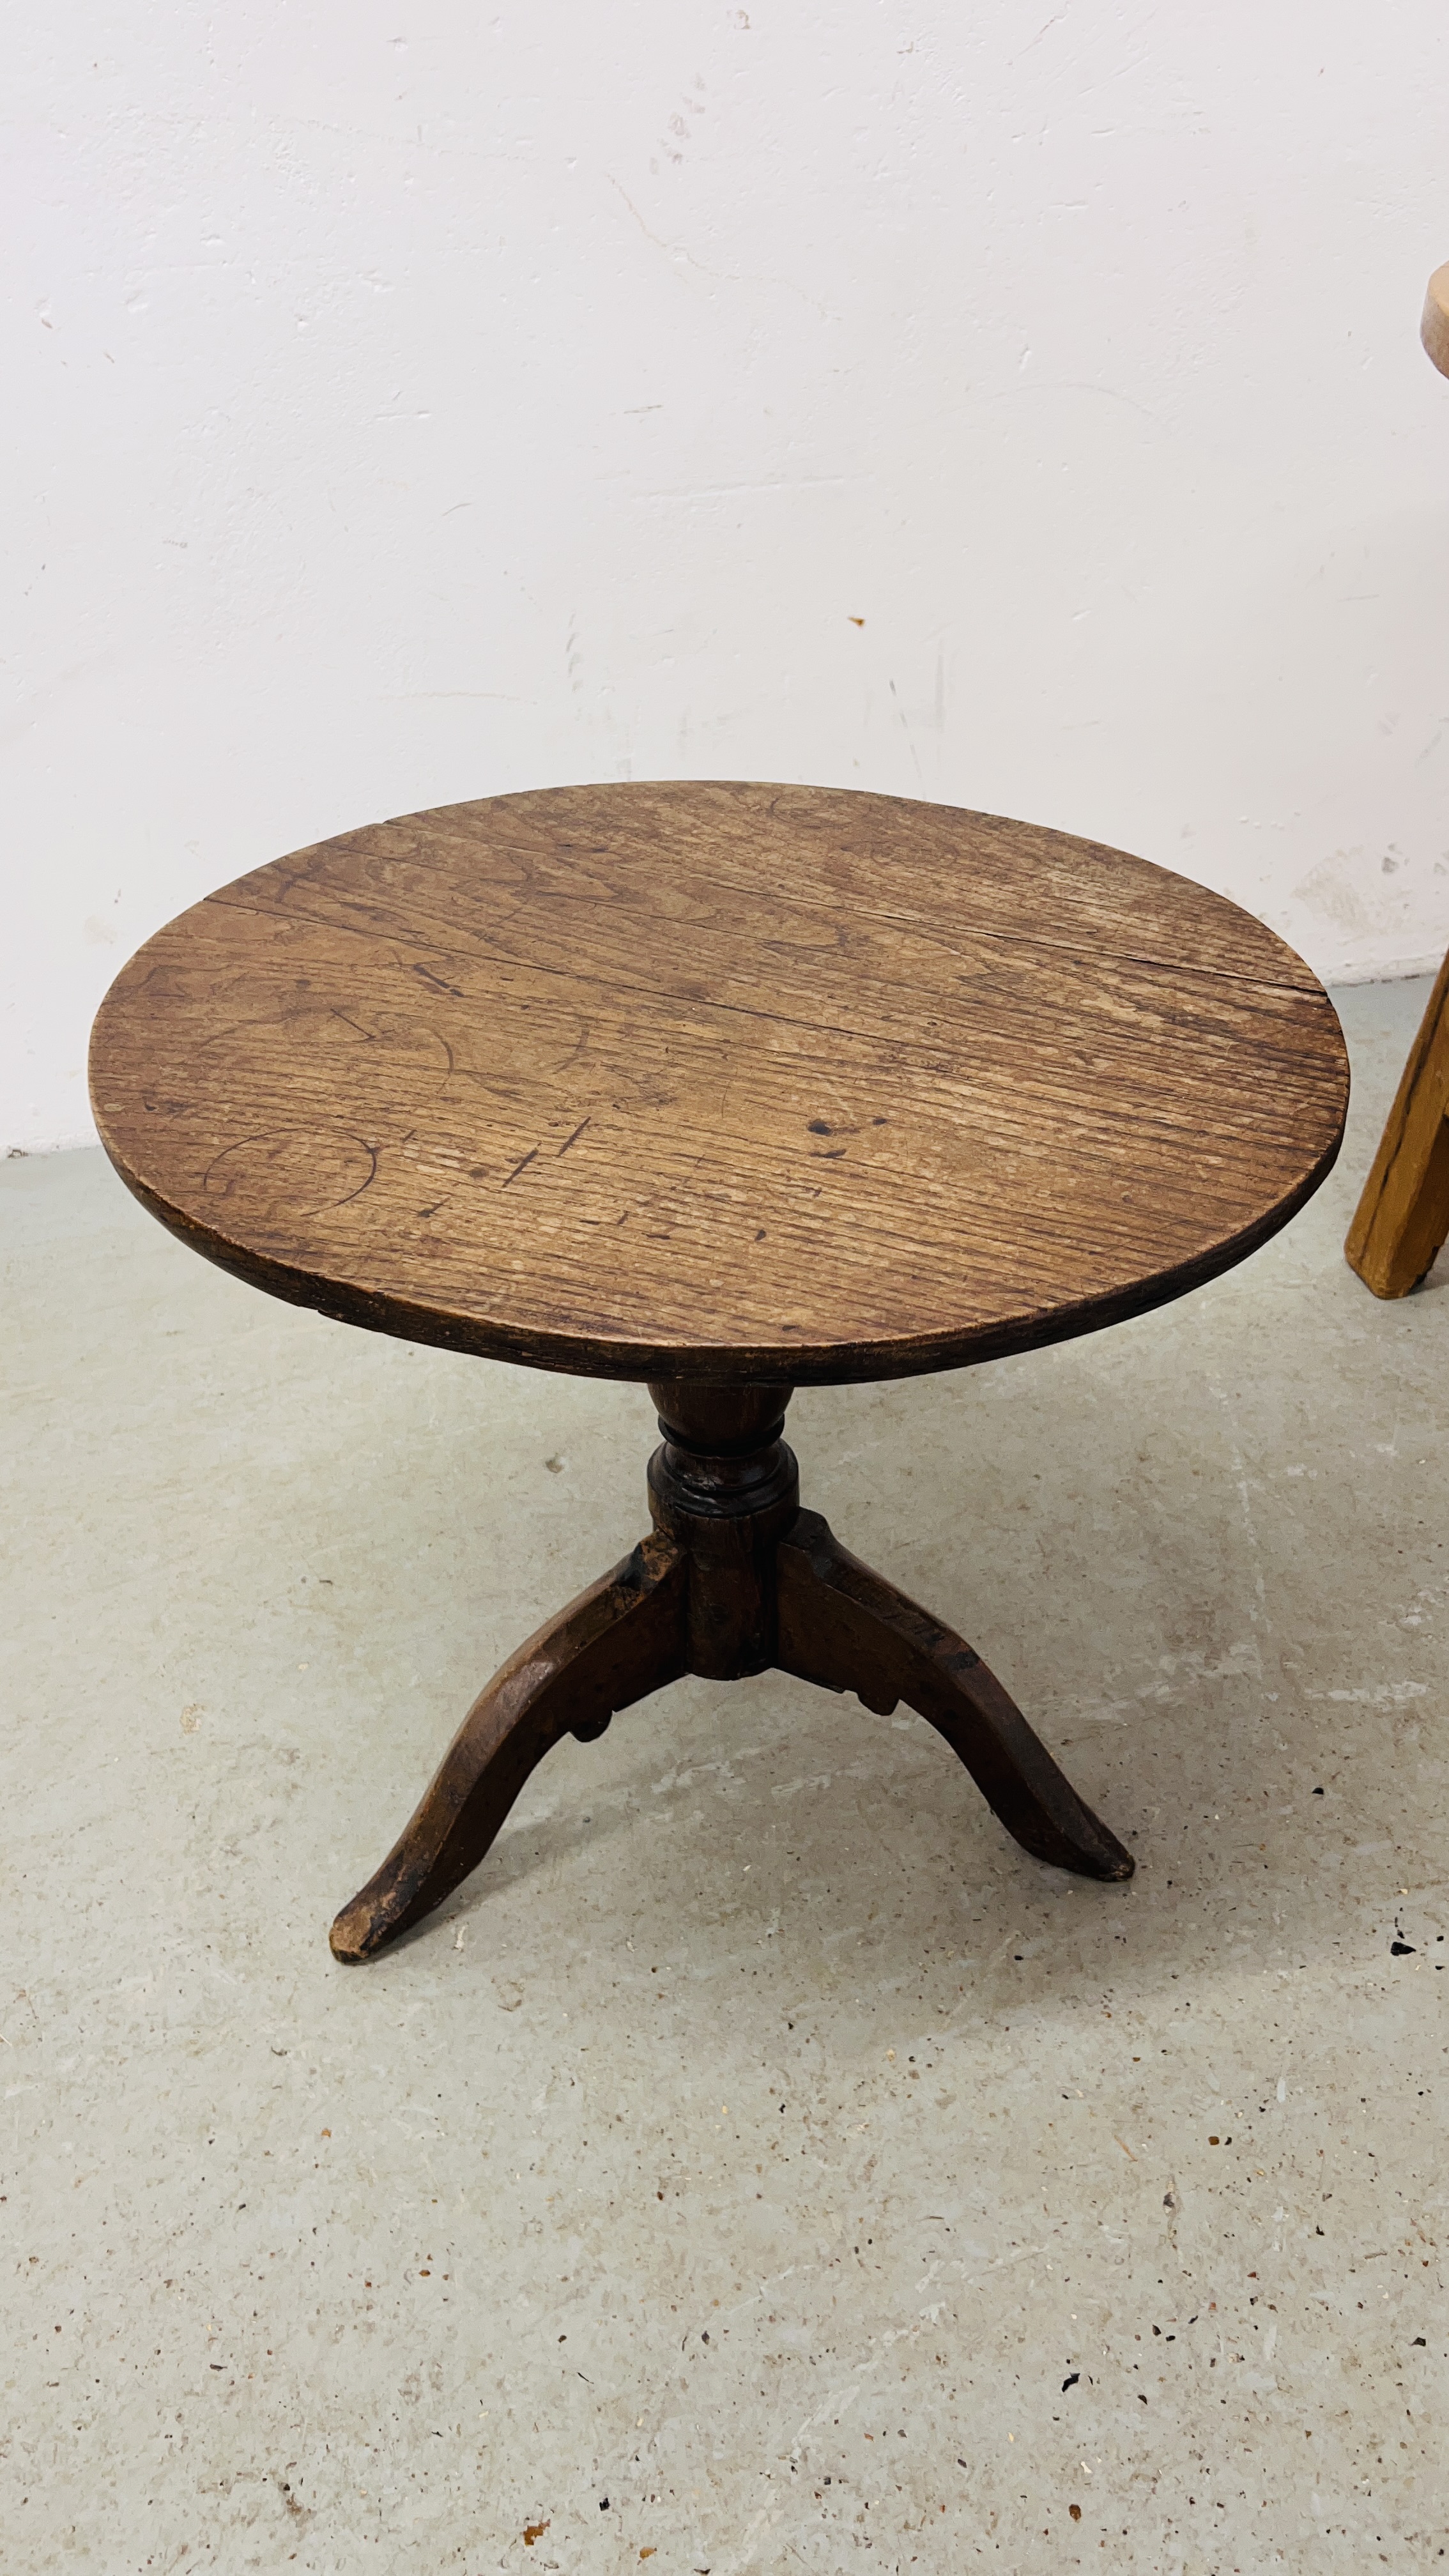 A VINTAGE PINE CIRCULAR TRI LEGGED OCCASIONAL TABLE WITH LOWER SHELF 72CM D X 72CM H ALONG WITH A - Image 2 of 10